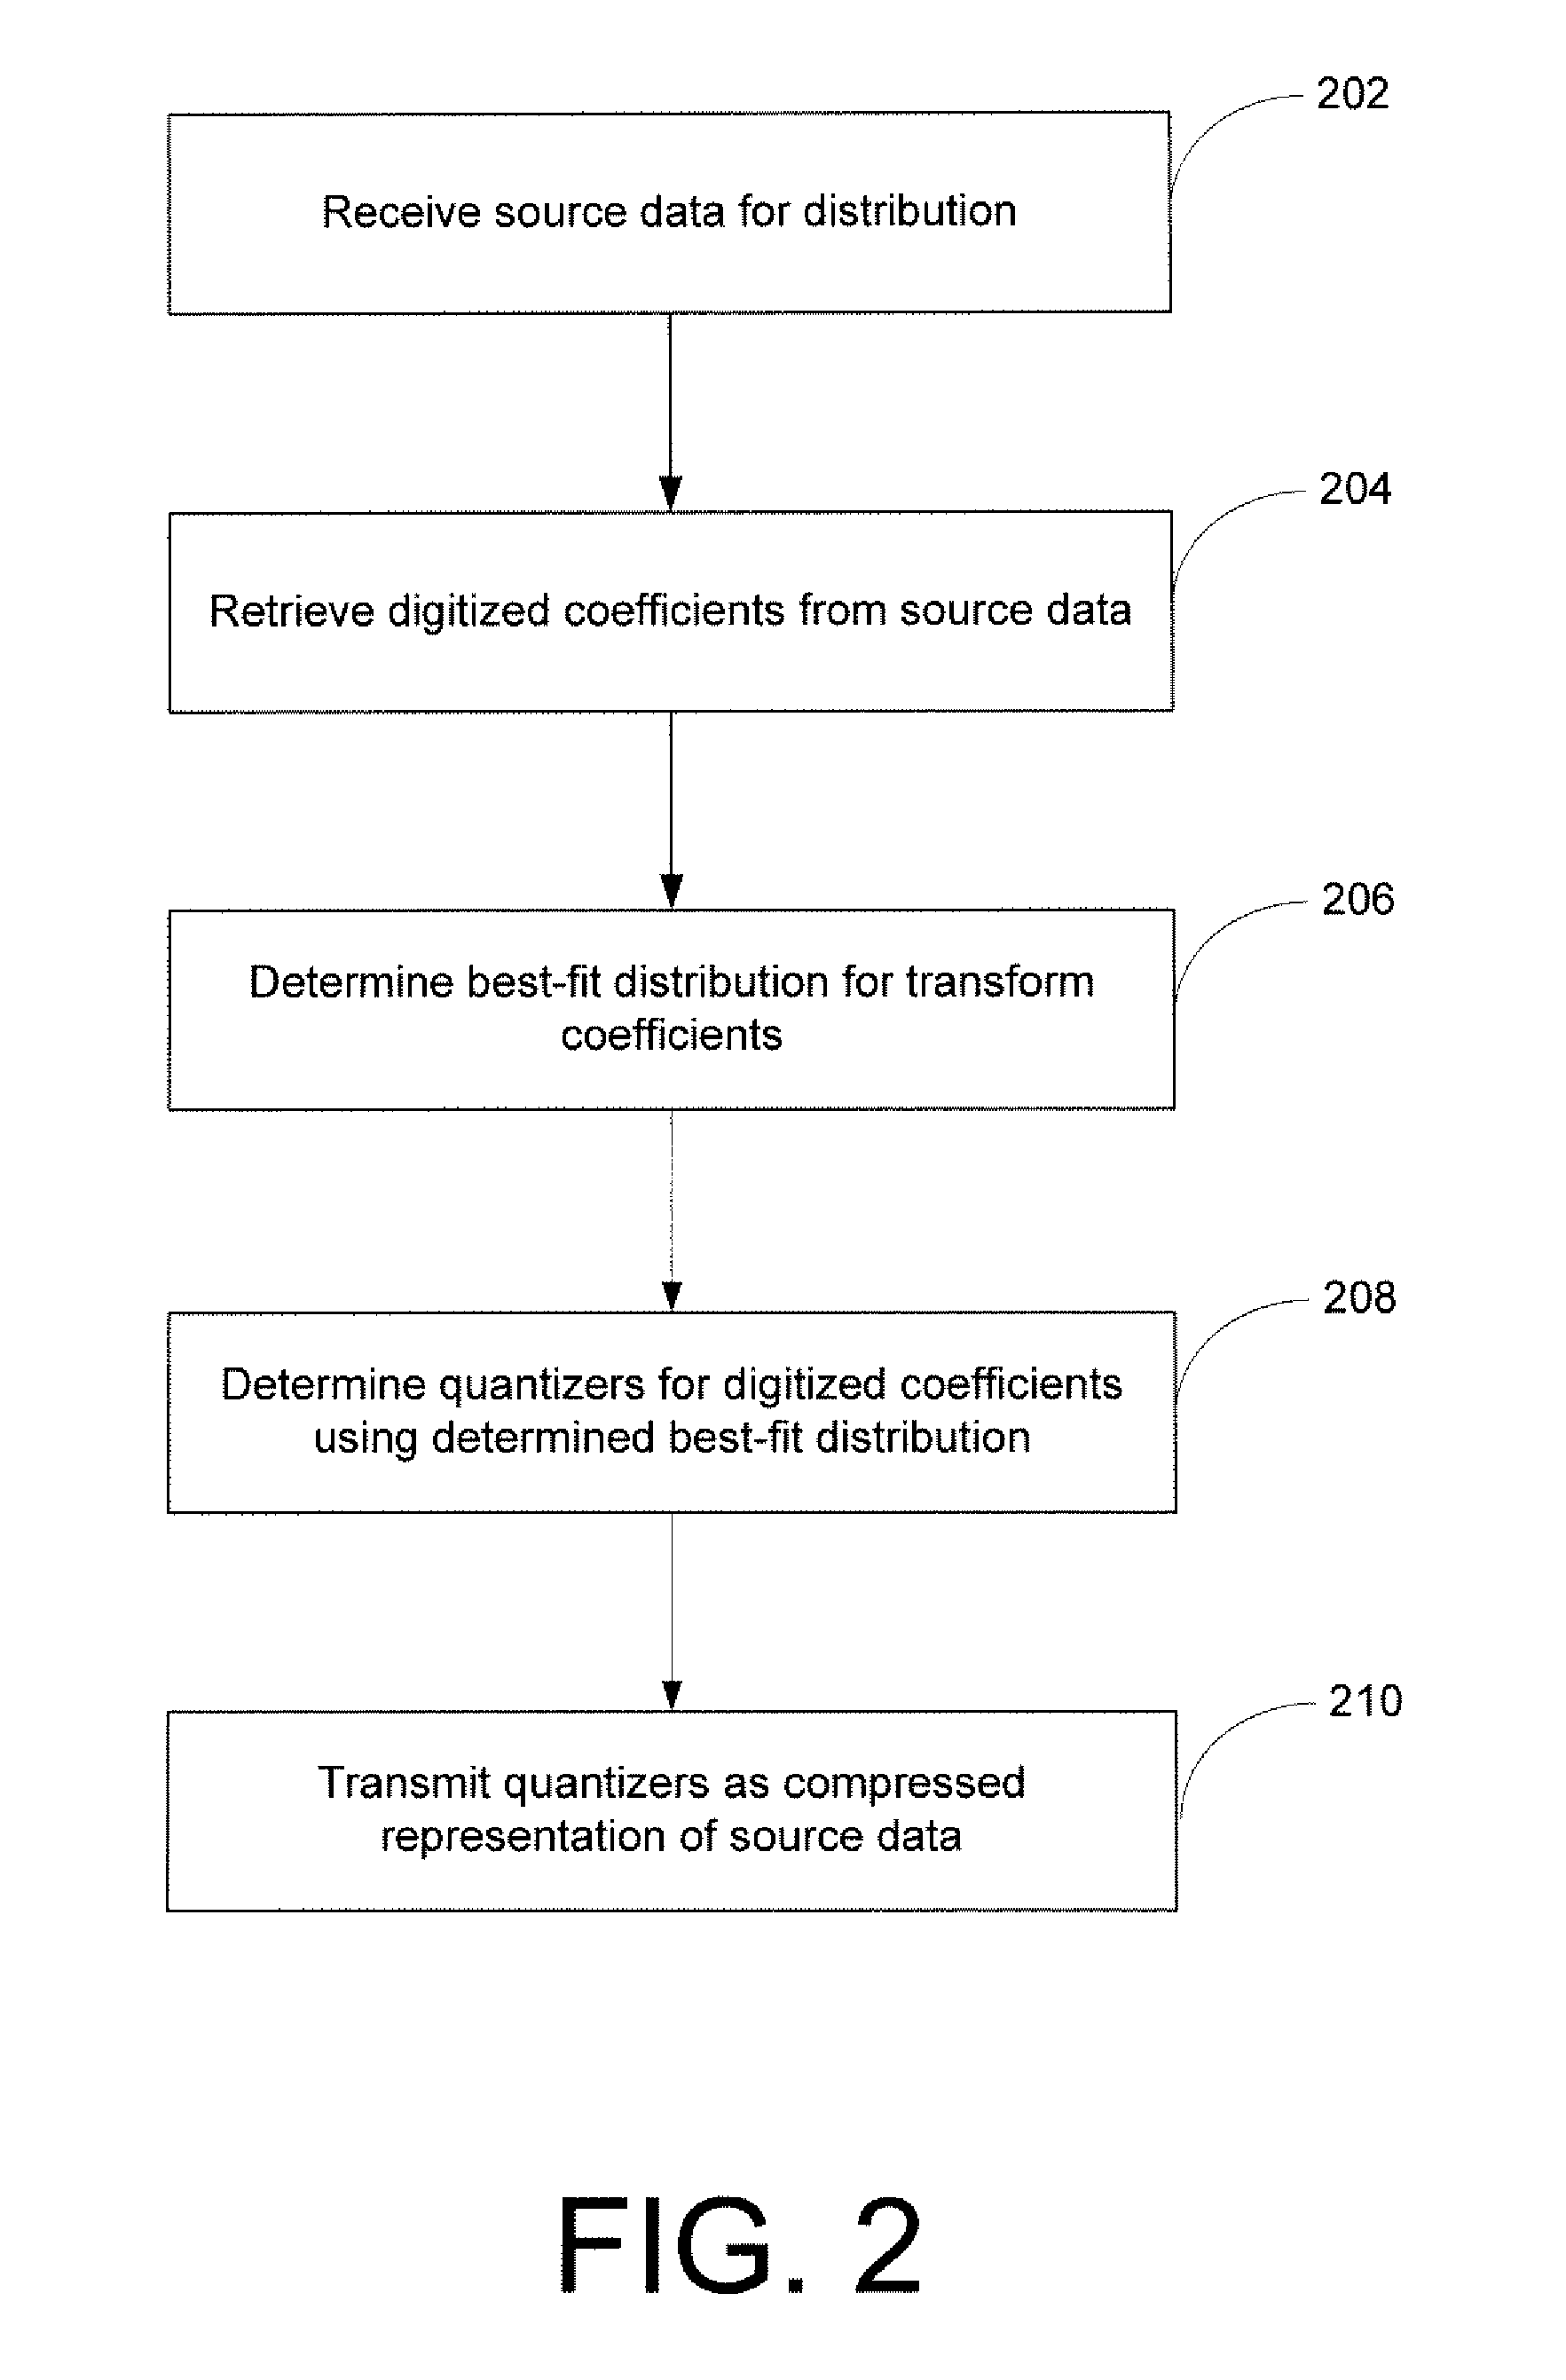 Systems, Methods, and Computer Program Products for Image Processing, Sensor Processing, and Other Signal Processing Using General Parametric Families of Distributions